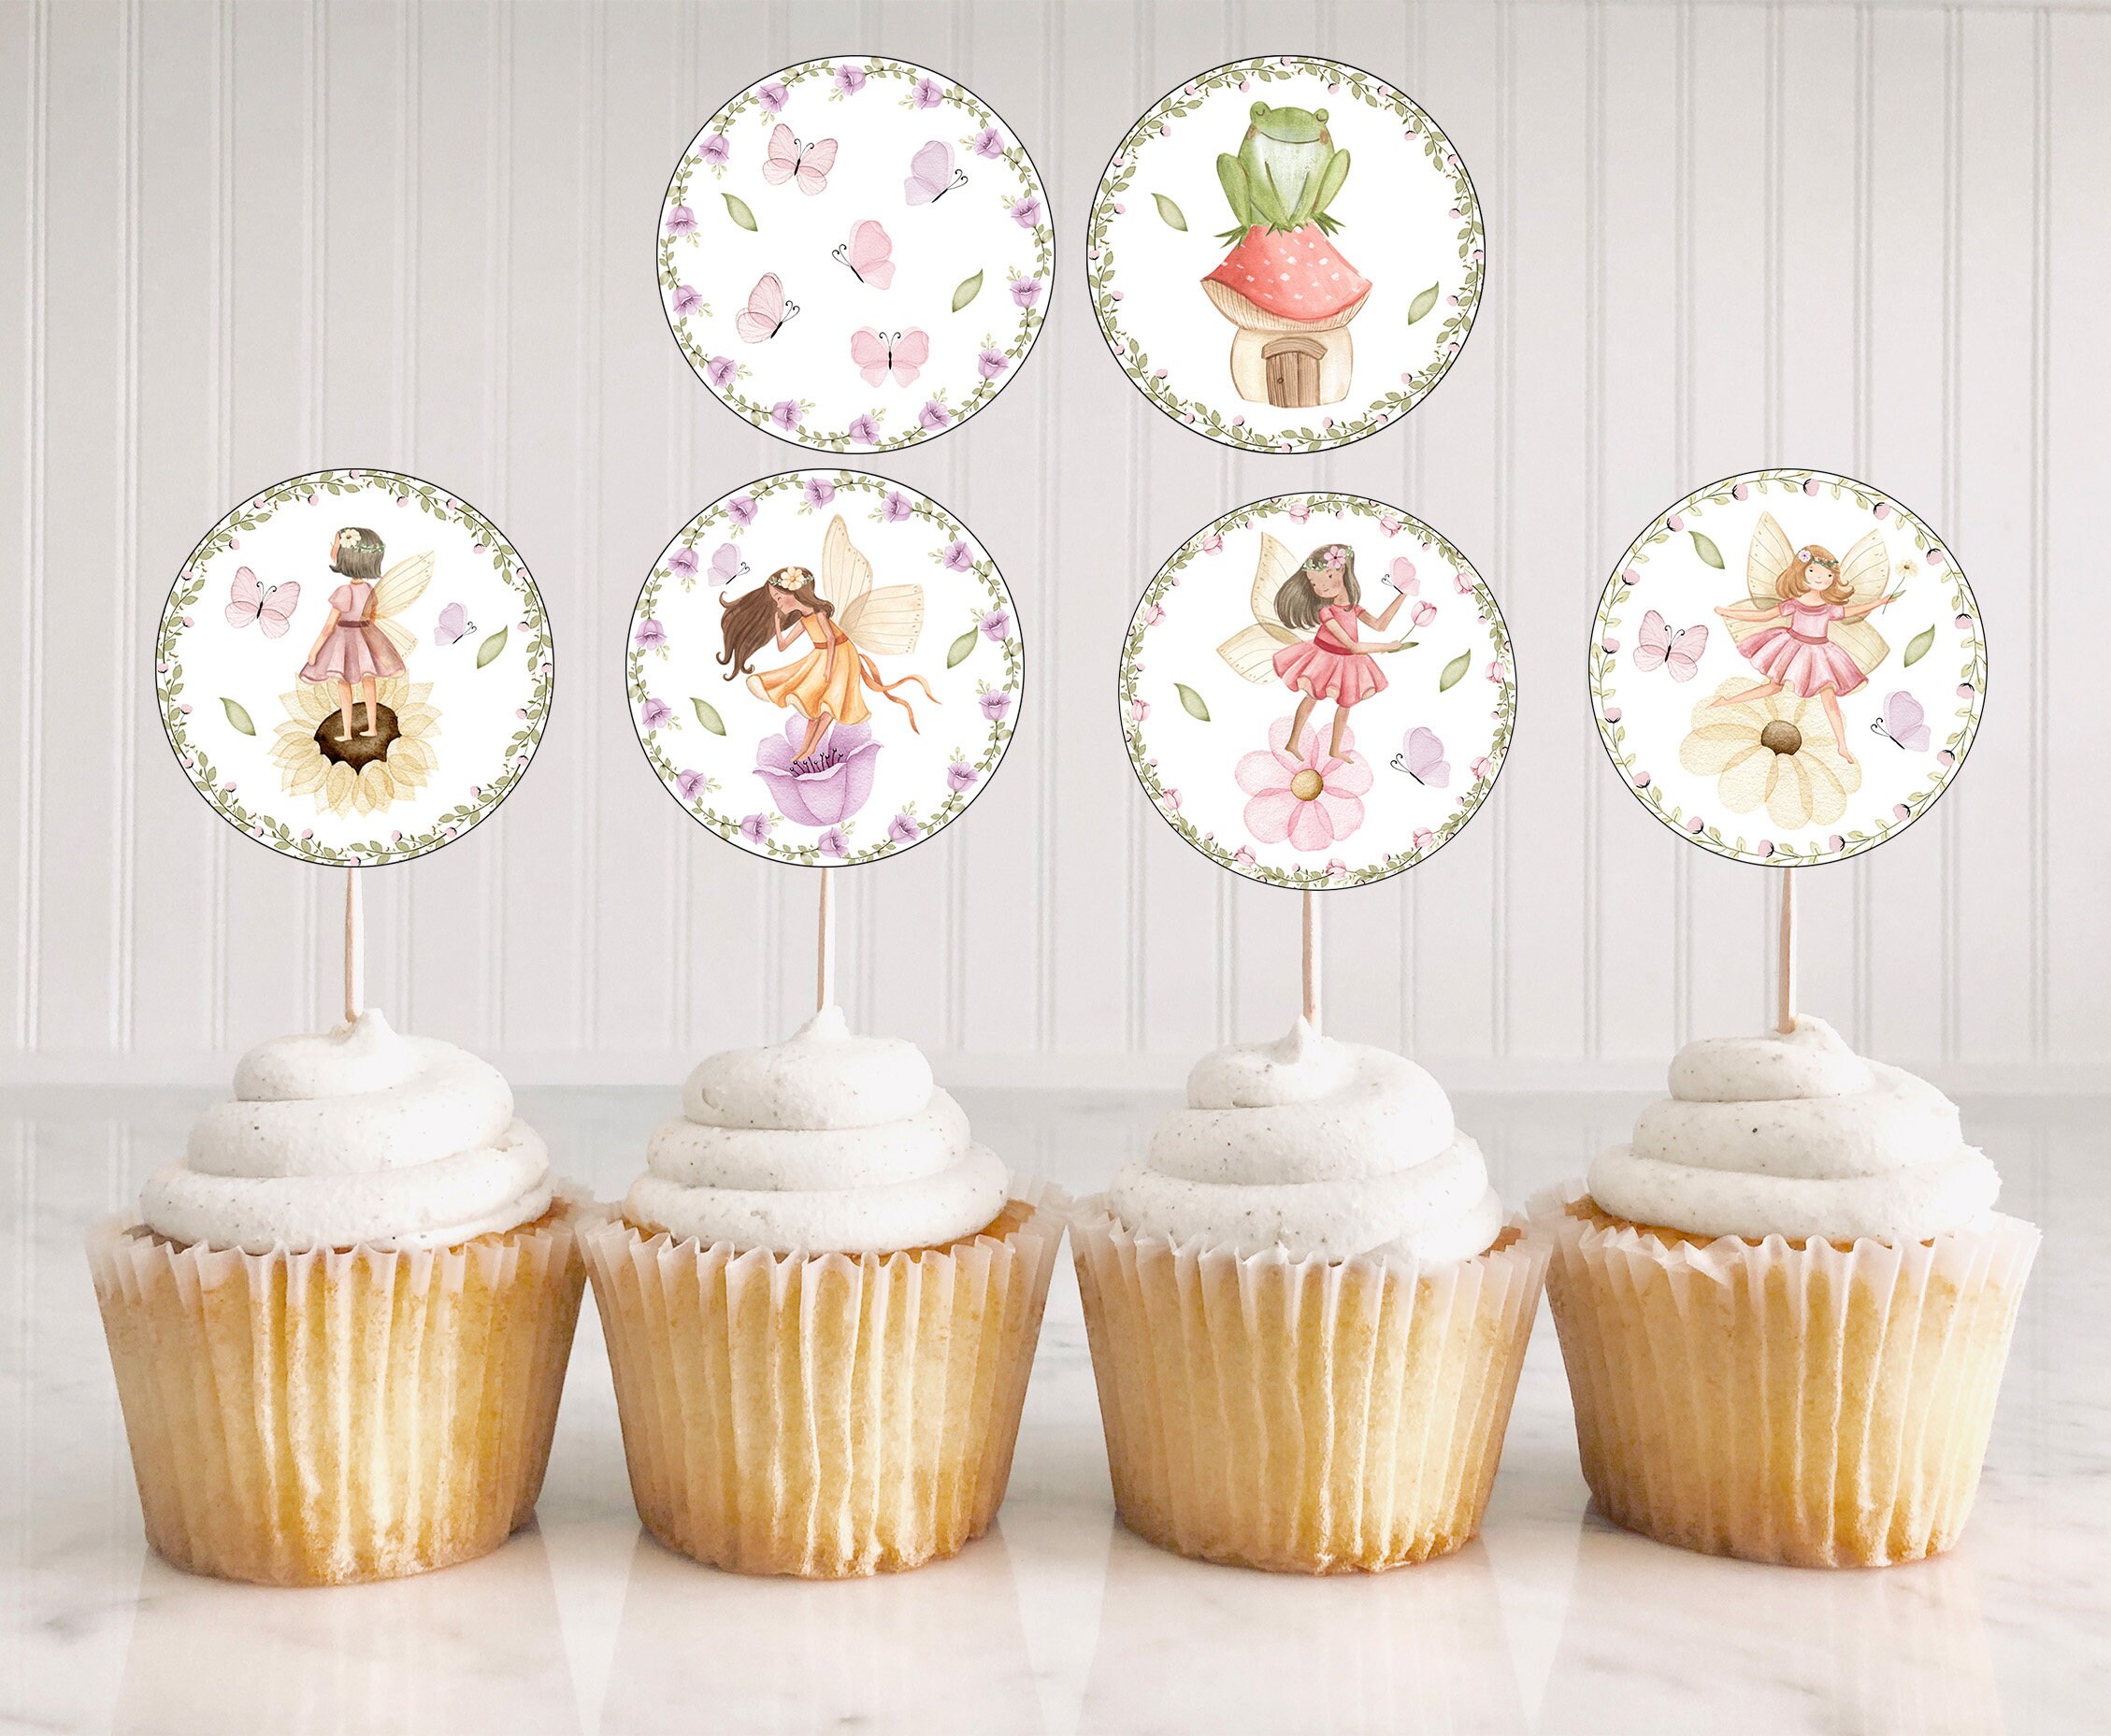 Line Dancing / Square Dance - 36 Edible Cupcake Toppers Fairy Cake